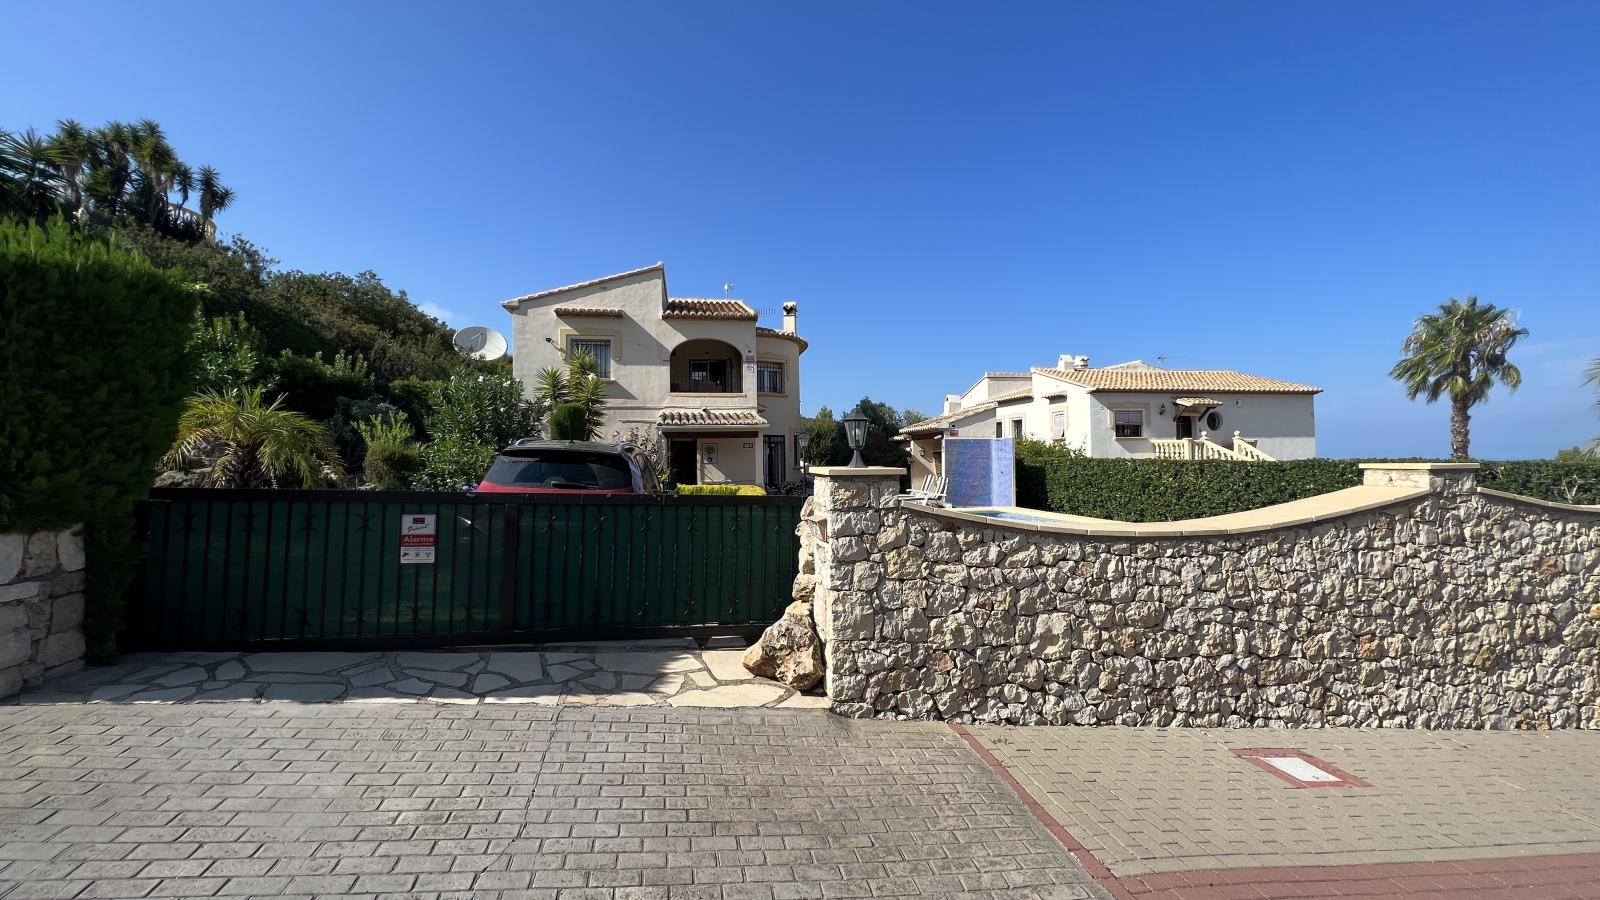 Large, Mediterranean family villa with pool and 3 bedrooms, in a quiet residential area of Rafol de Almunia.